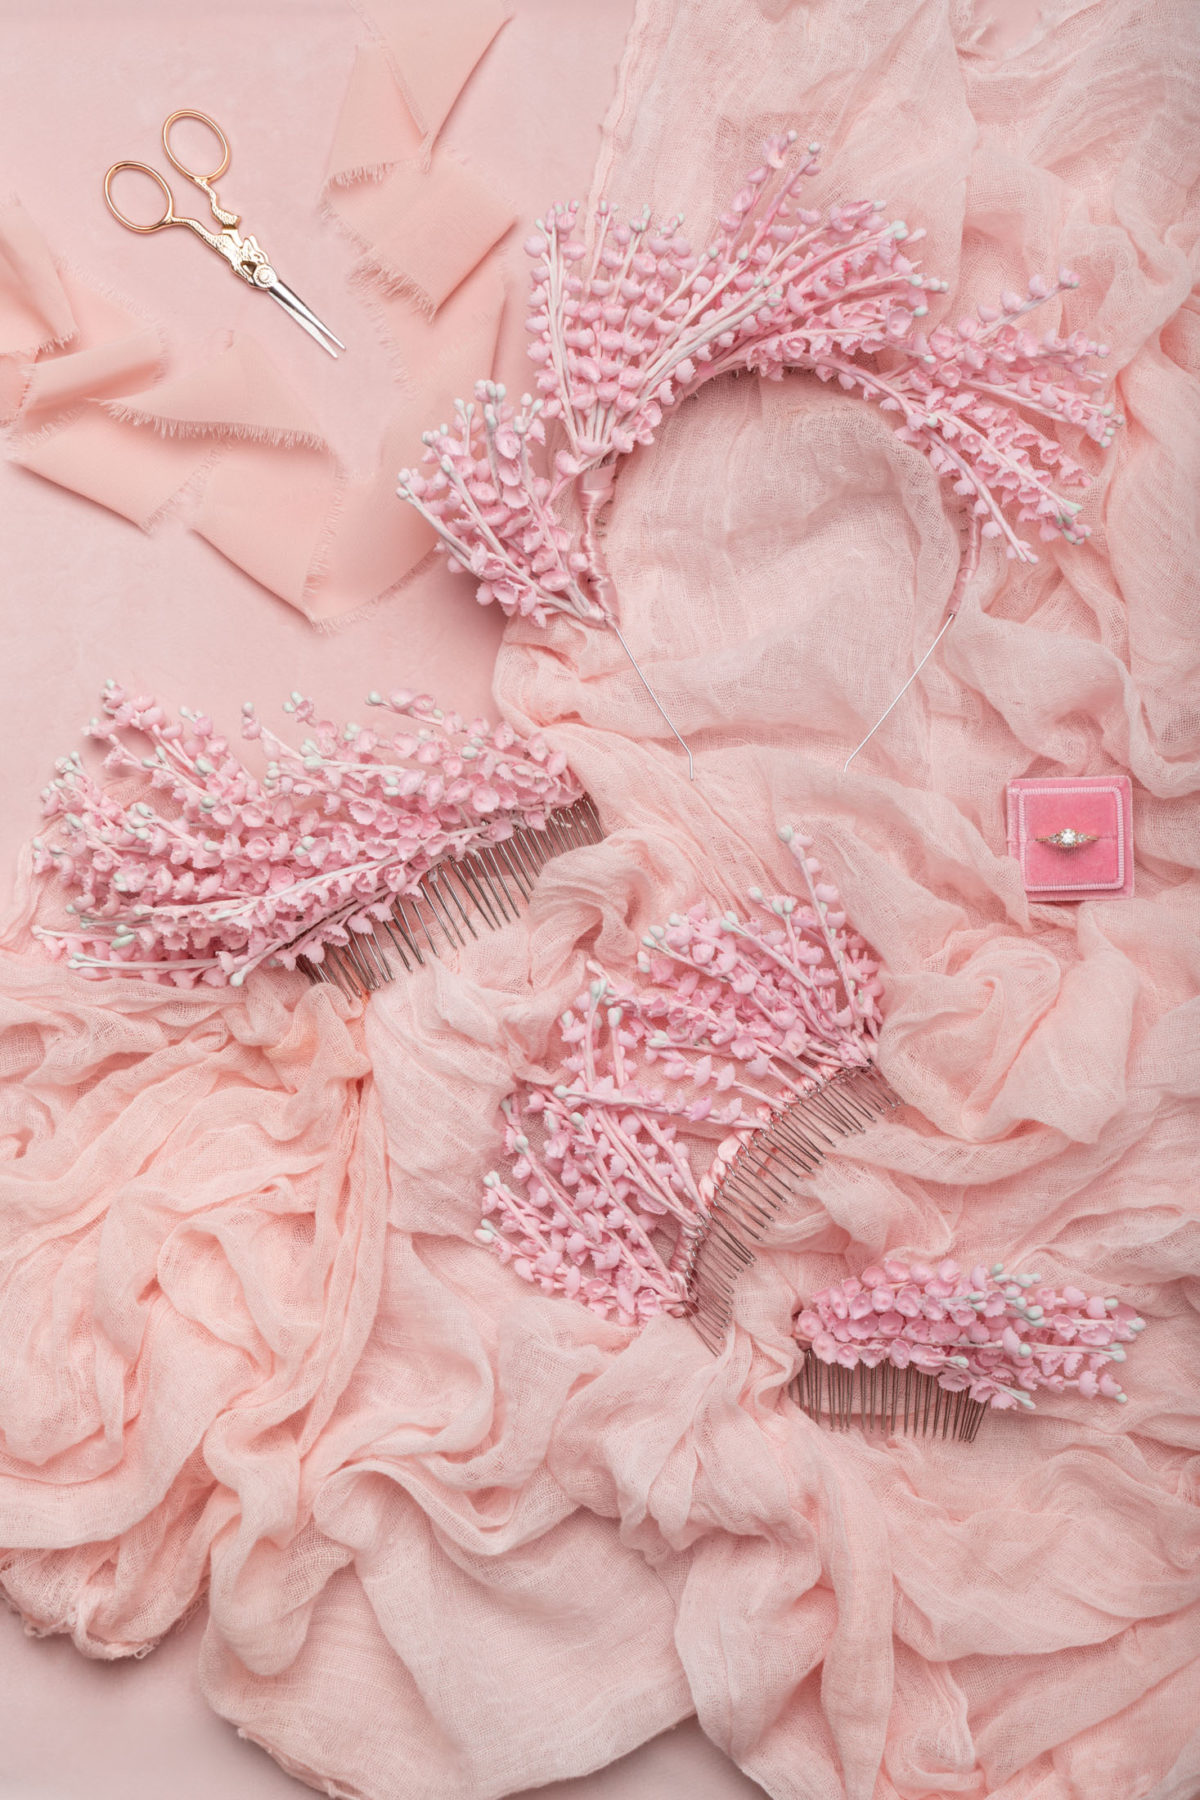 Flat lay of pink wedding headbands by Mariee Lace Veils on pink fabric